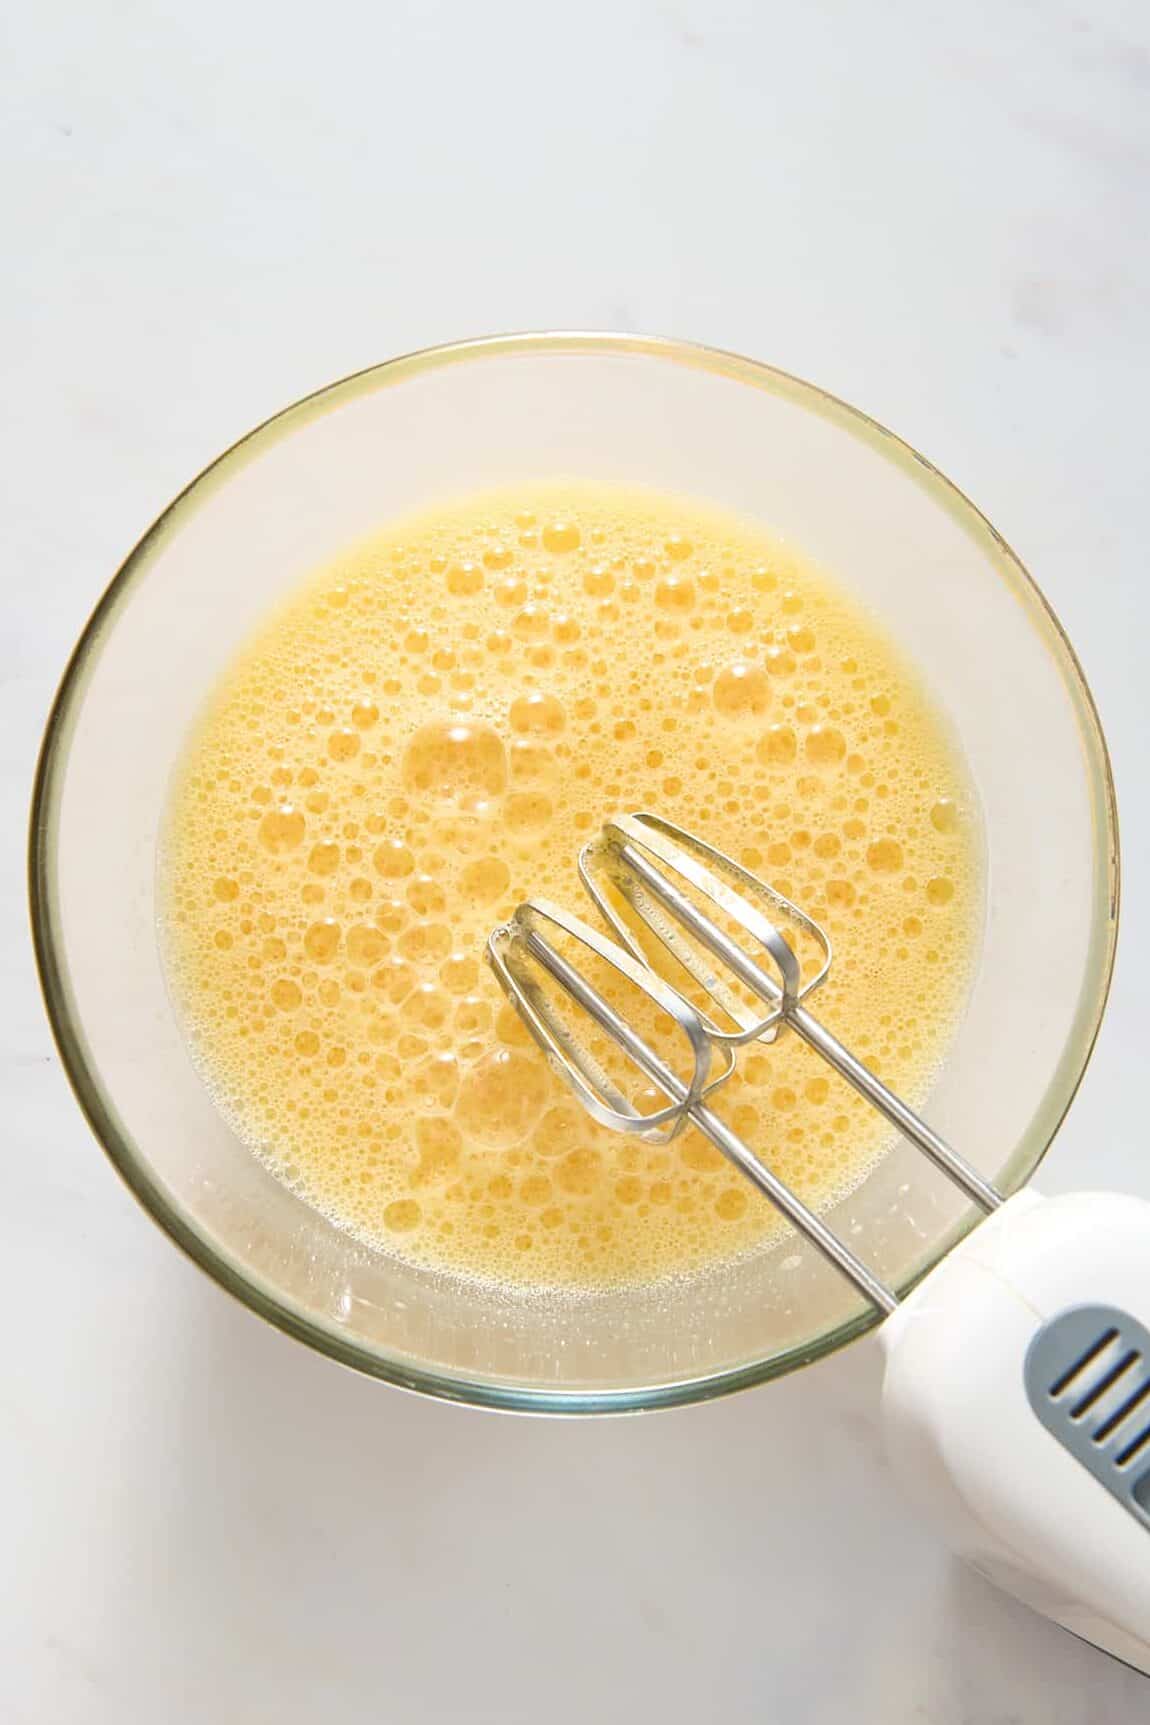 Image of an egg mixture, sitting in a large glass mixing bowl with an electric handheld whisk.